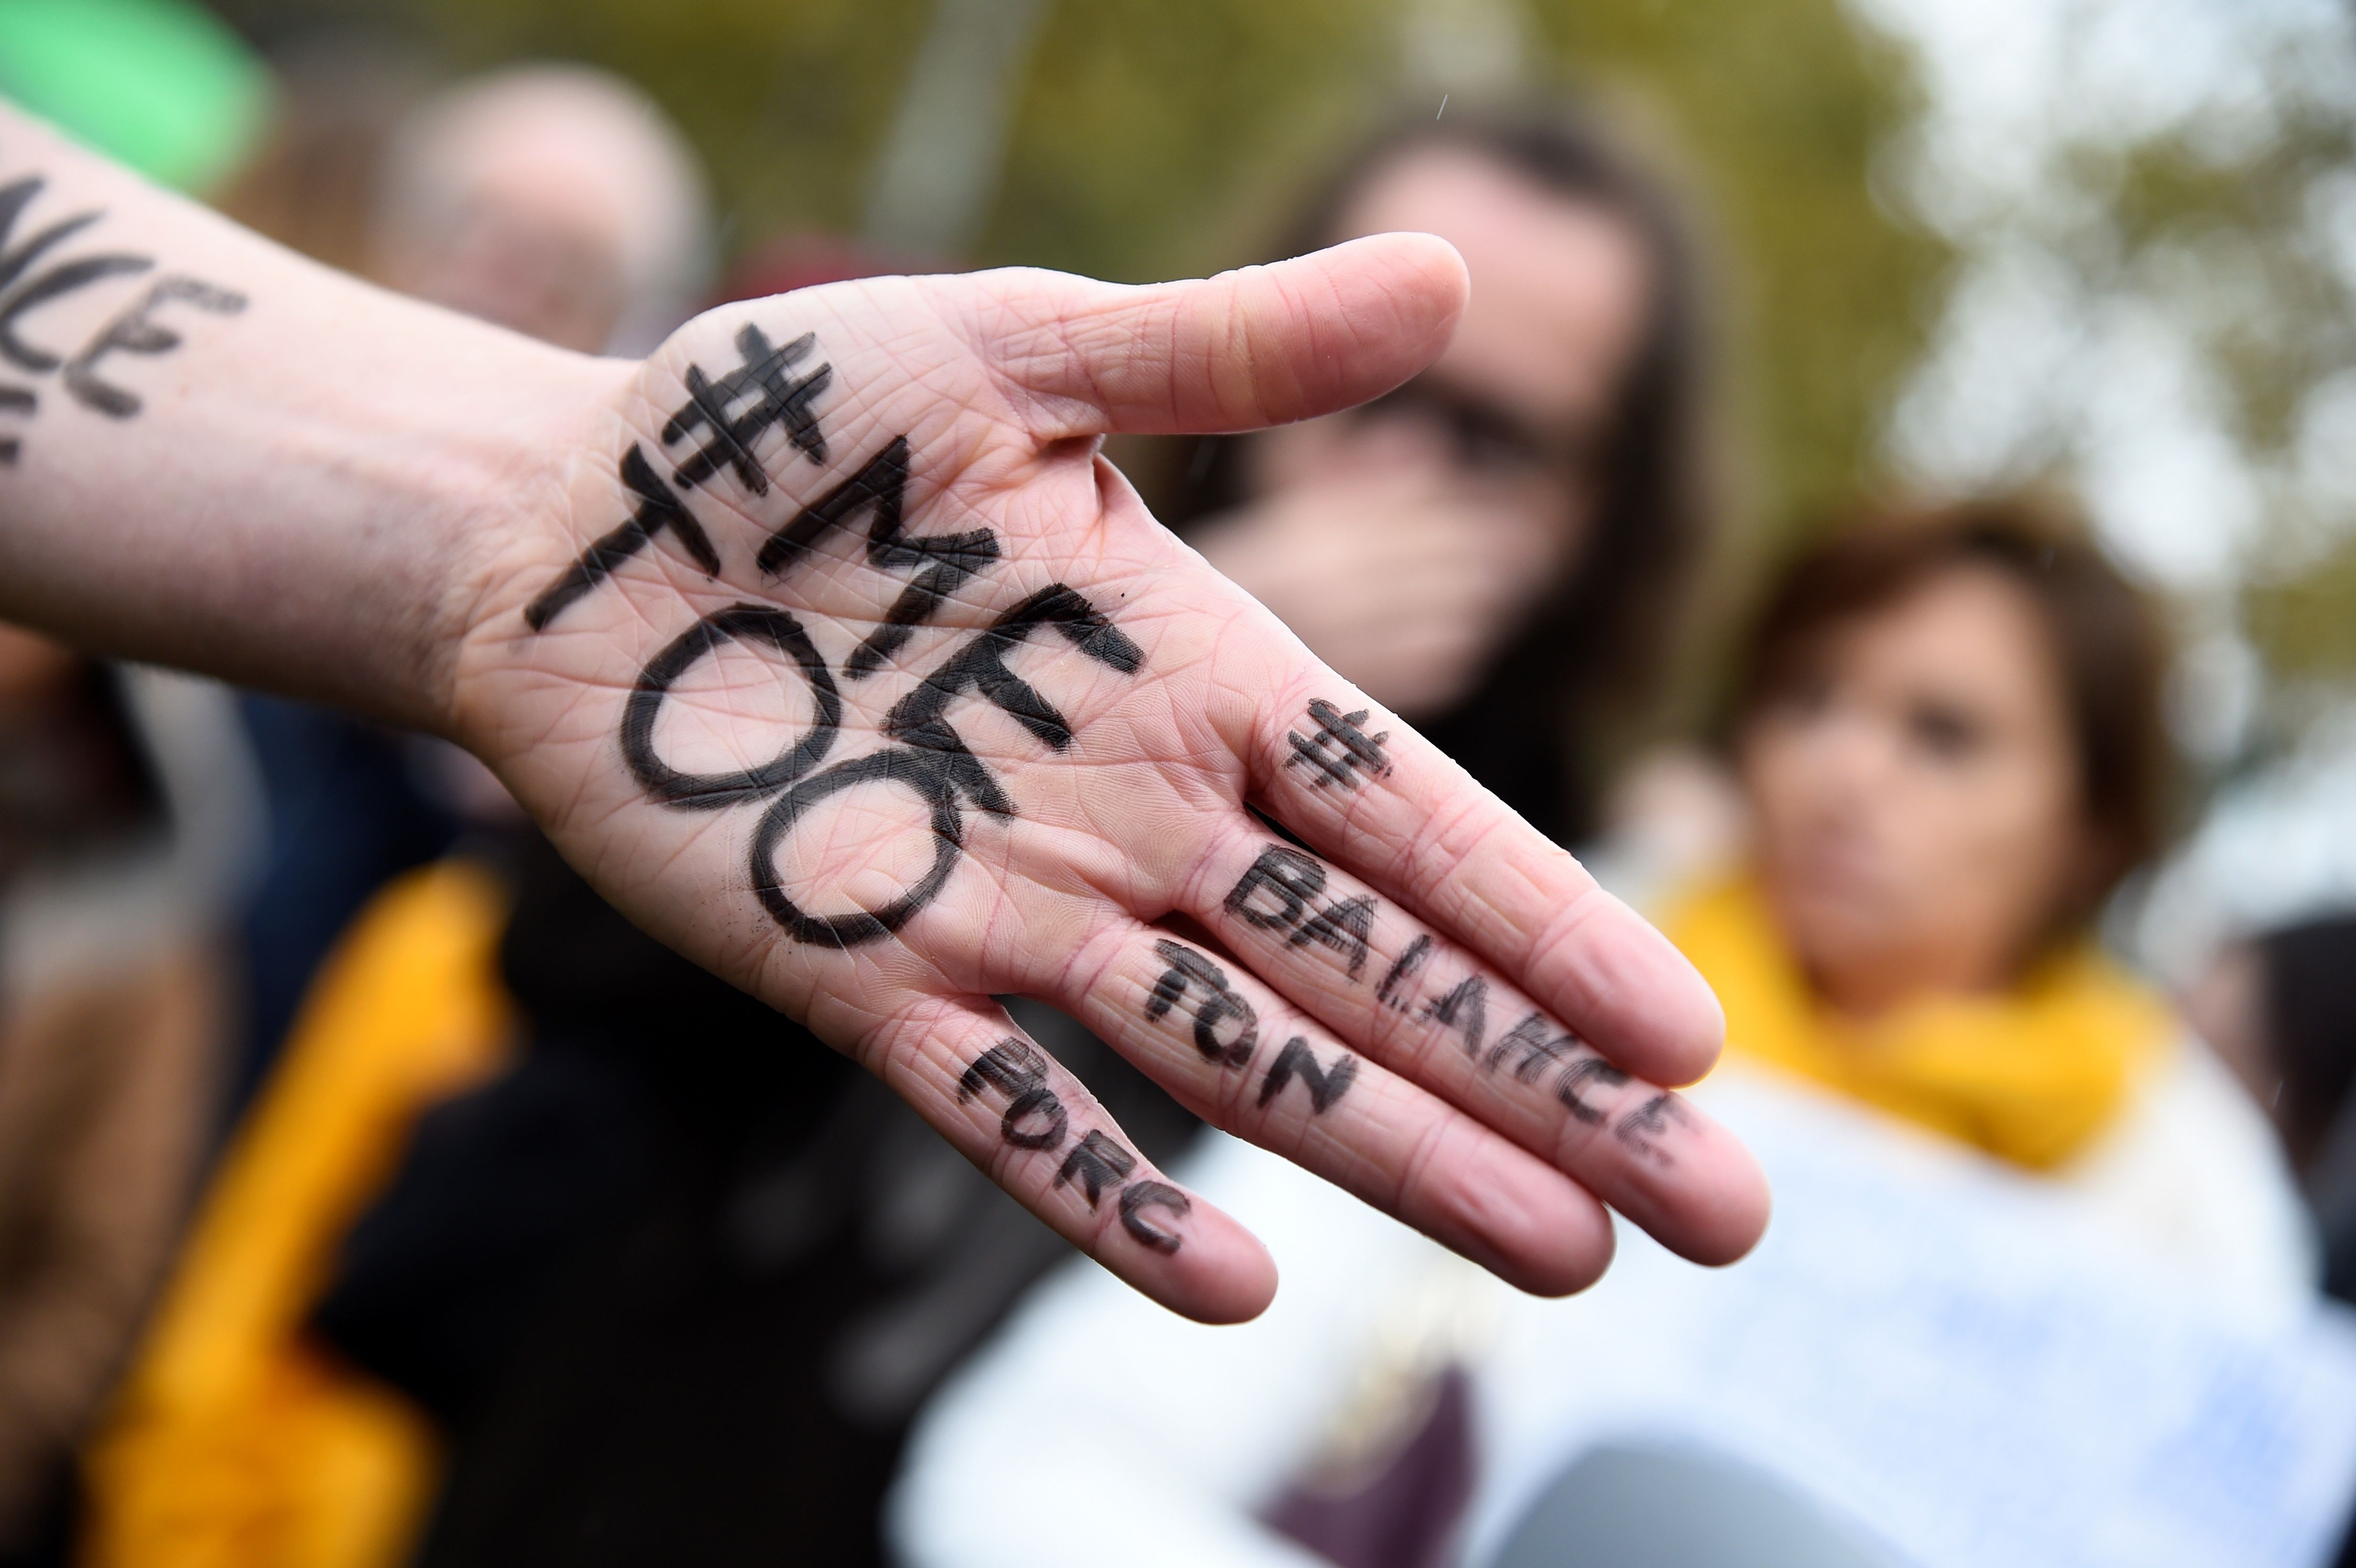 A protester displays the message at a gathering against gender-based and sexual violence, in Paris on October 29, as part of the global “#MeToo” campaign. Photo: AFP